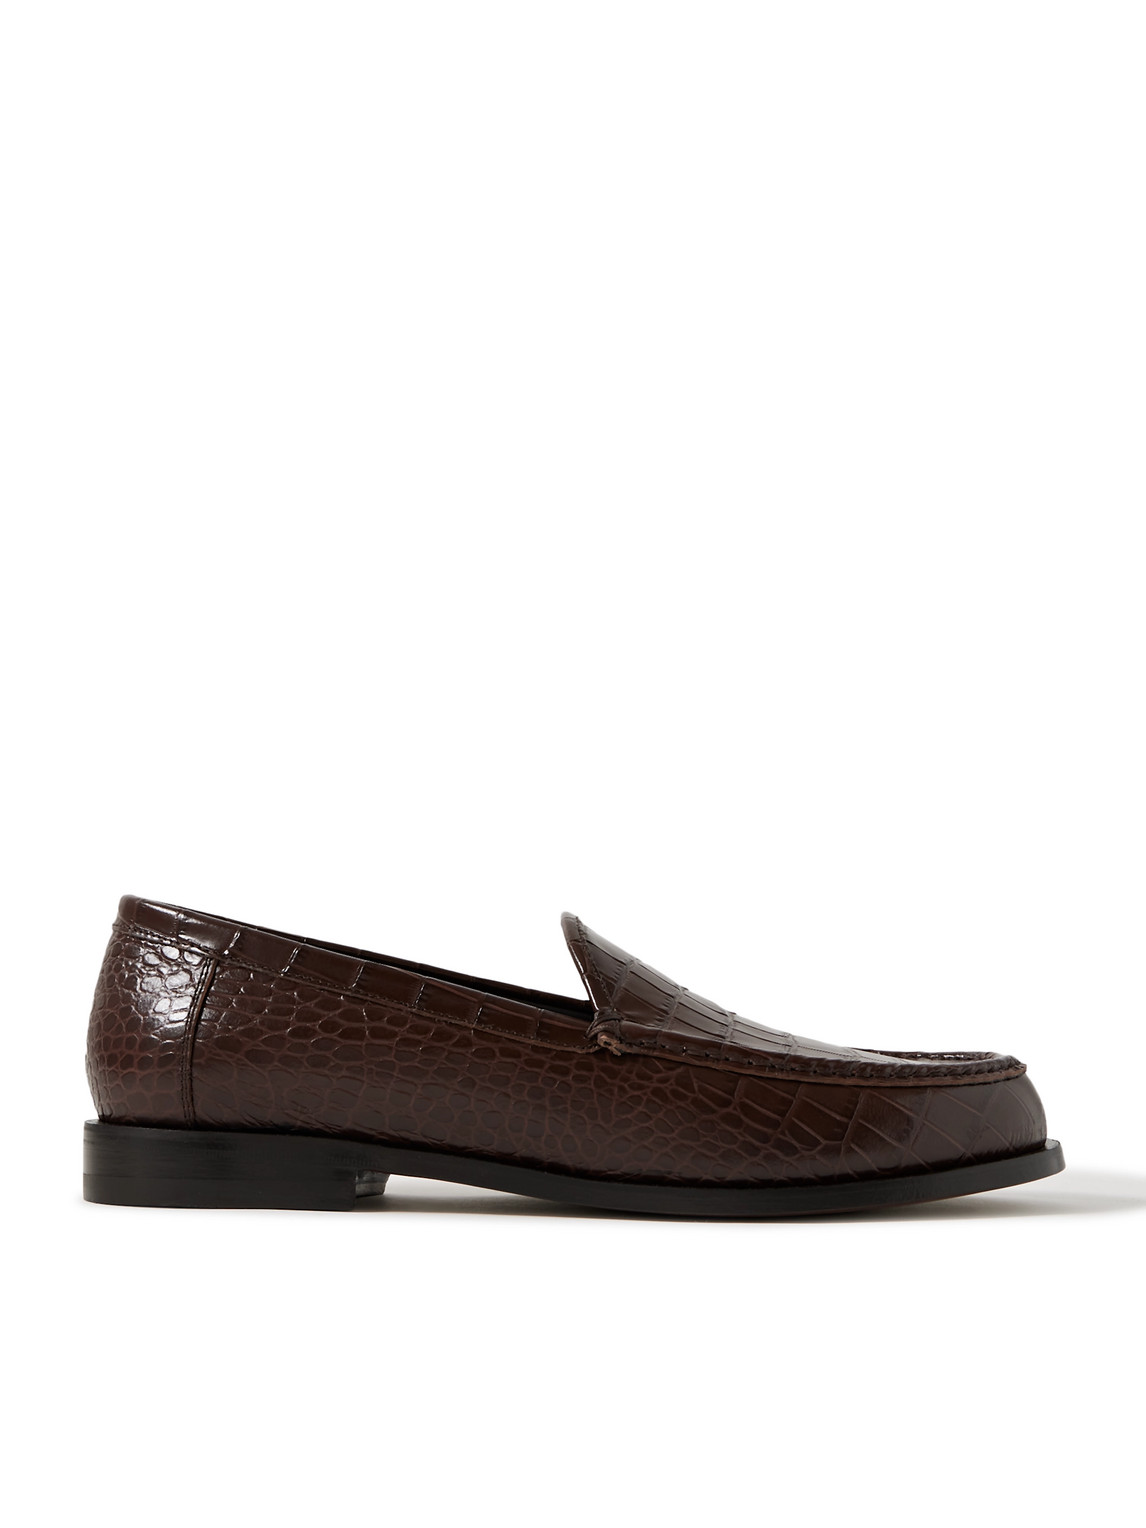 Manolo Blahnik Ralone Croc-effect Leather Loafers In Brown